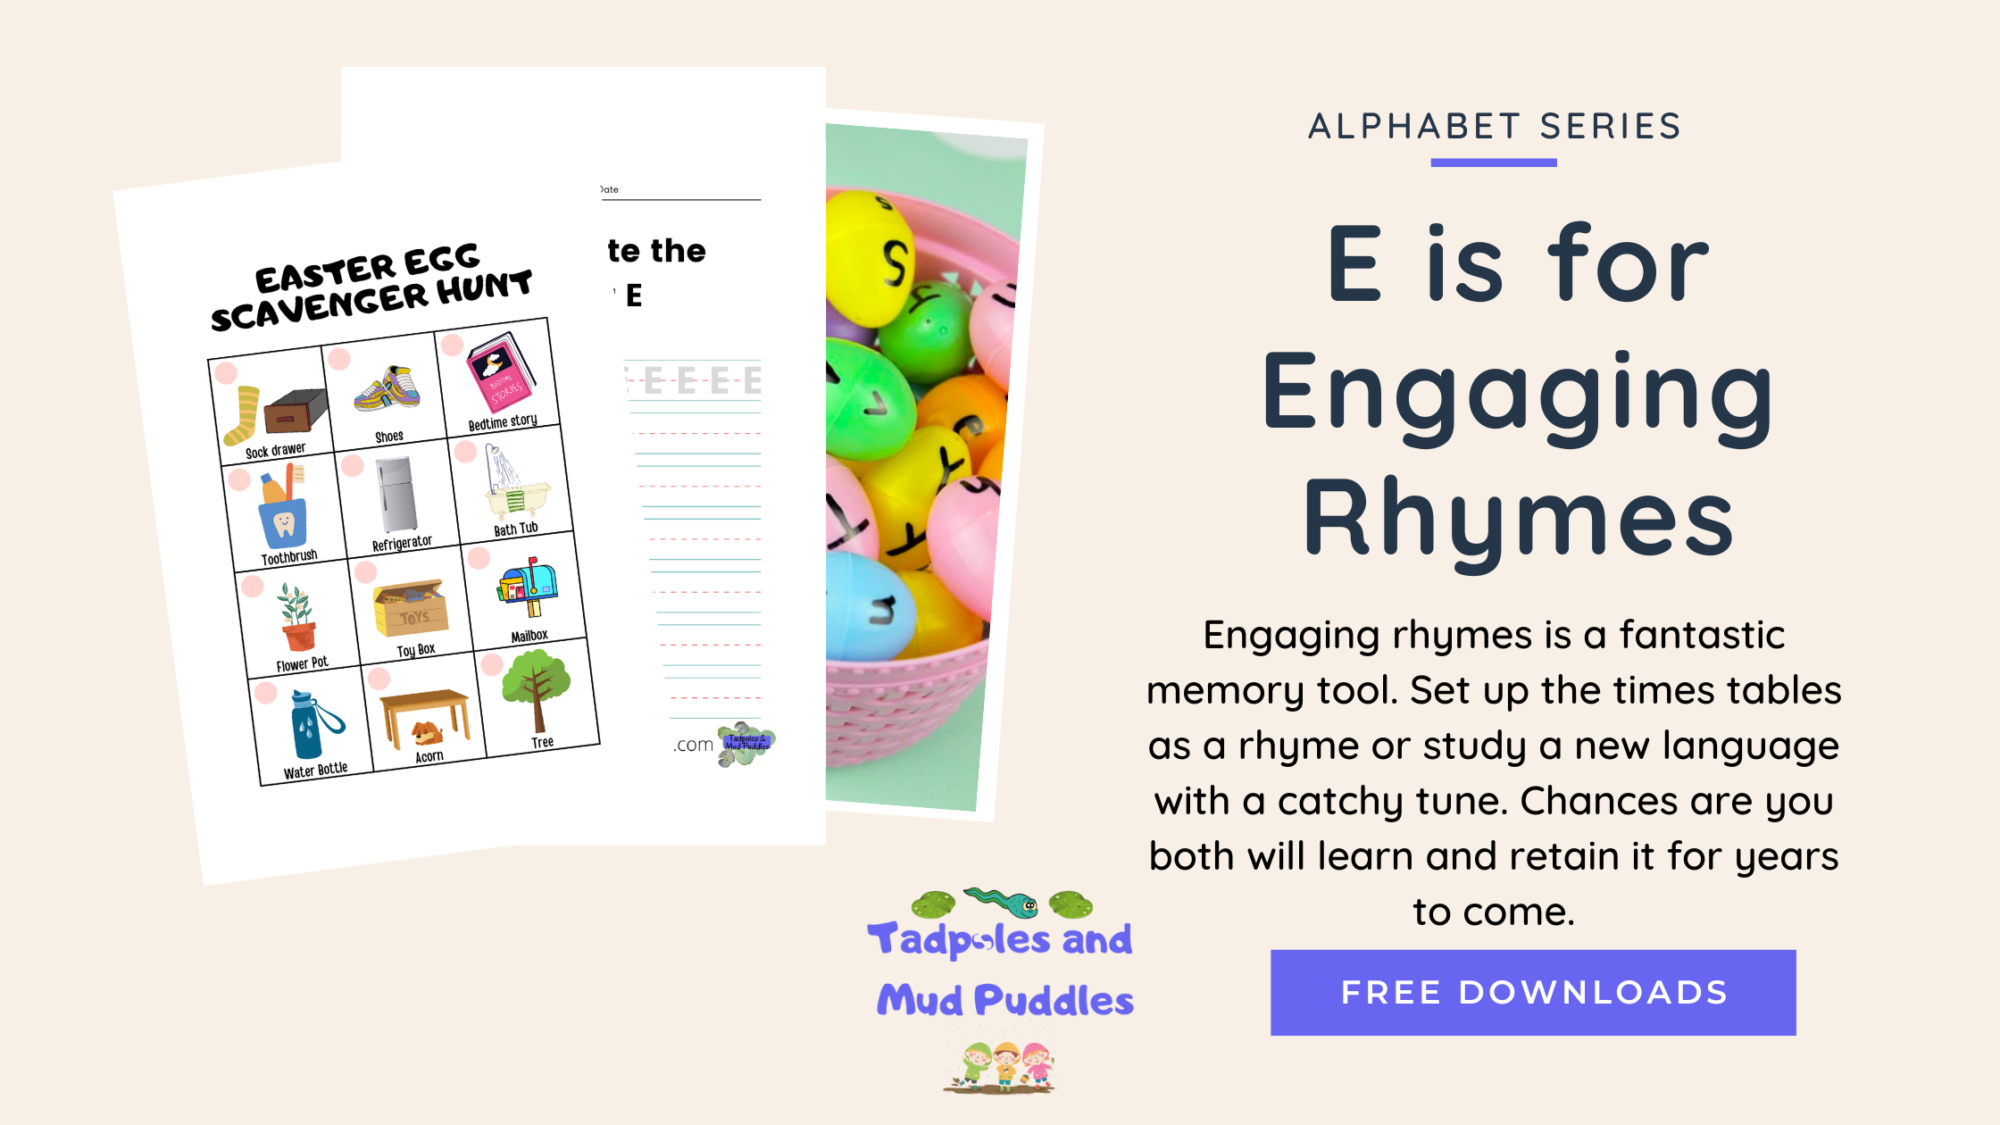 E is for engaging rhymes